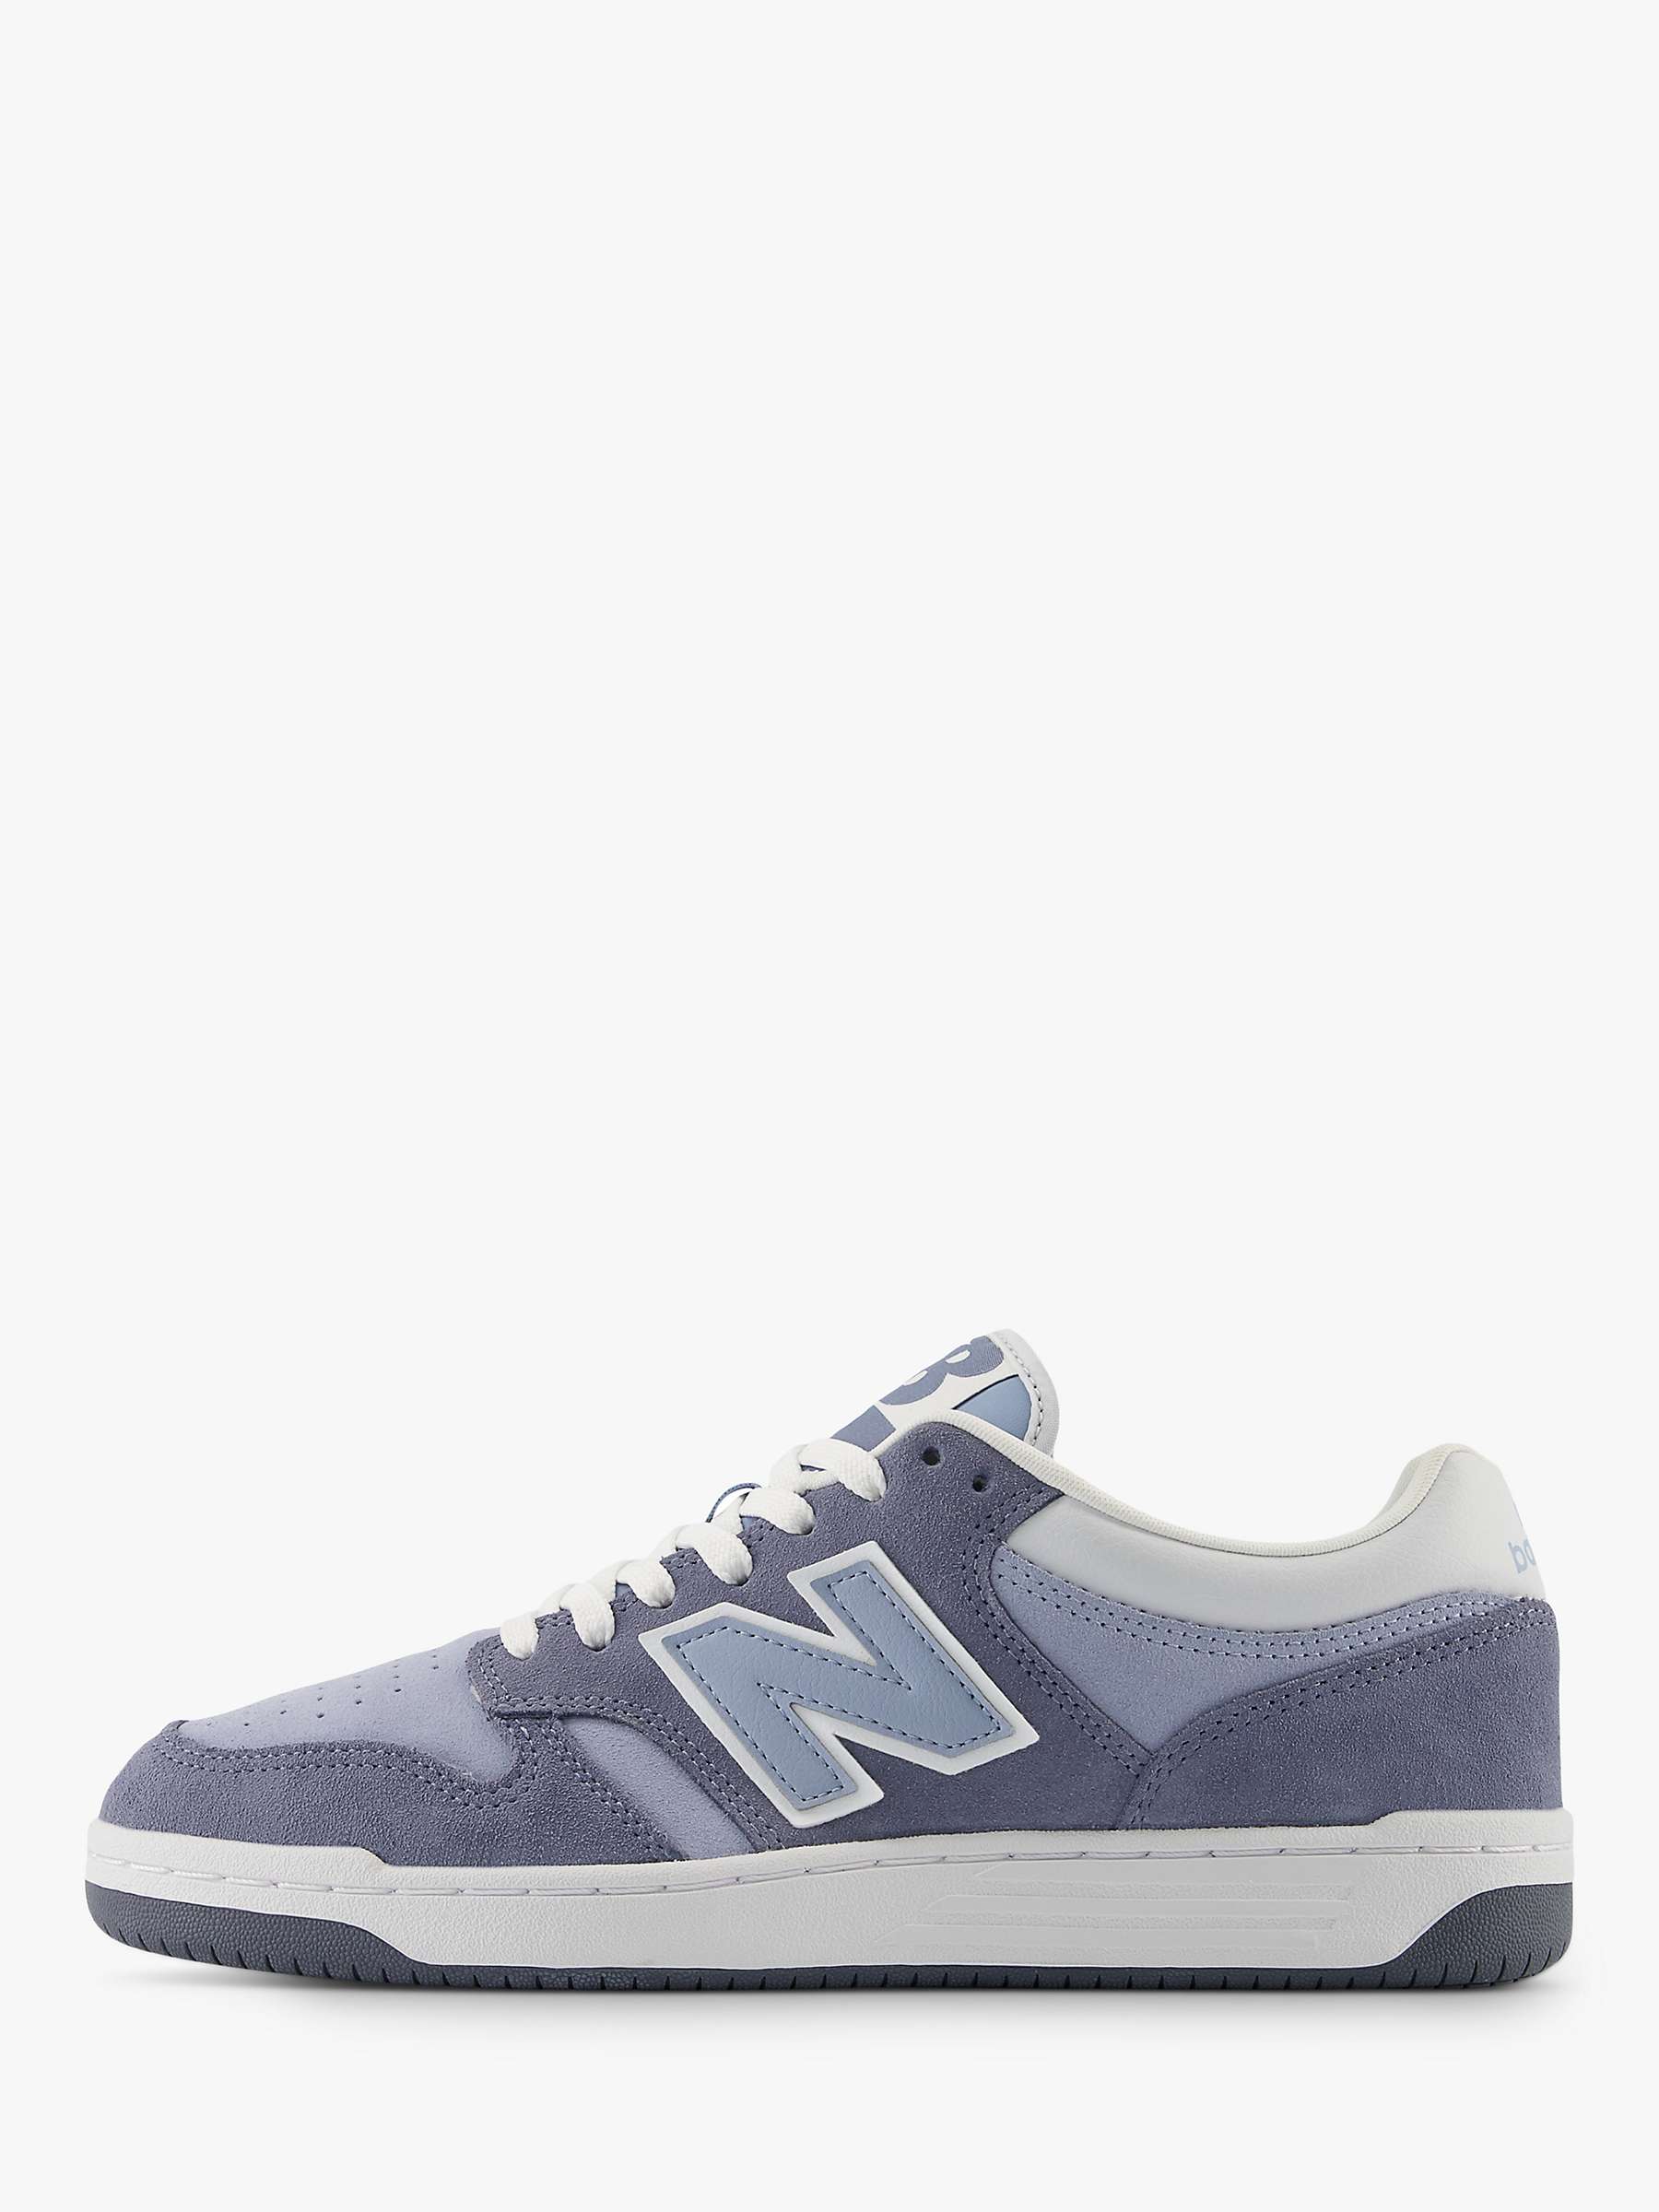 Buy New Balance 480 Lace Up Trainers Online at johnlewis.com